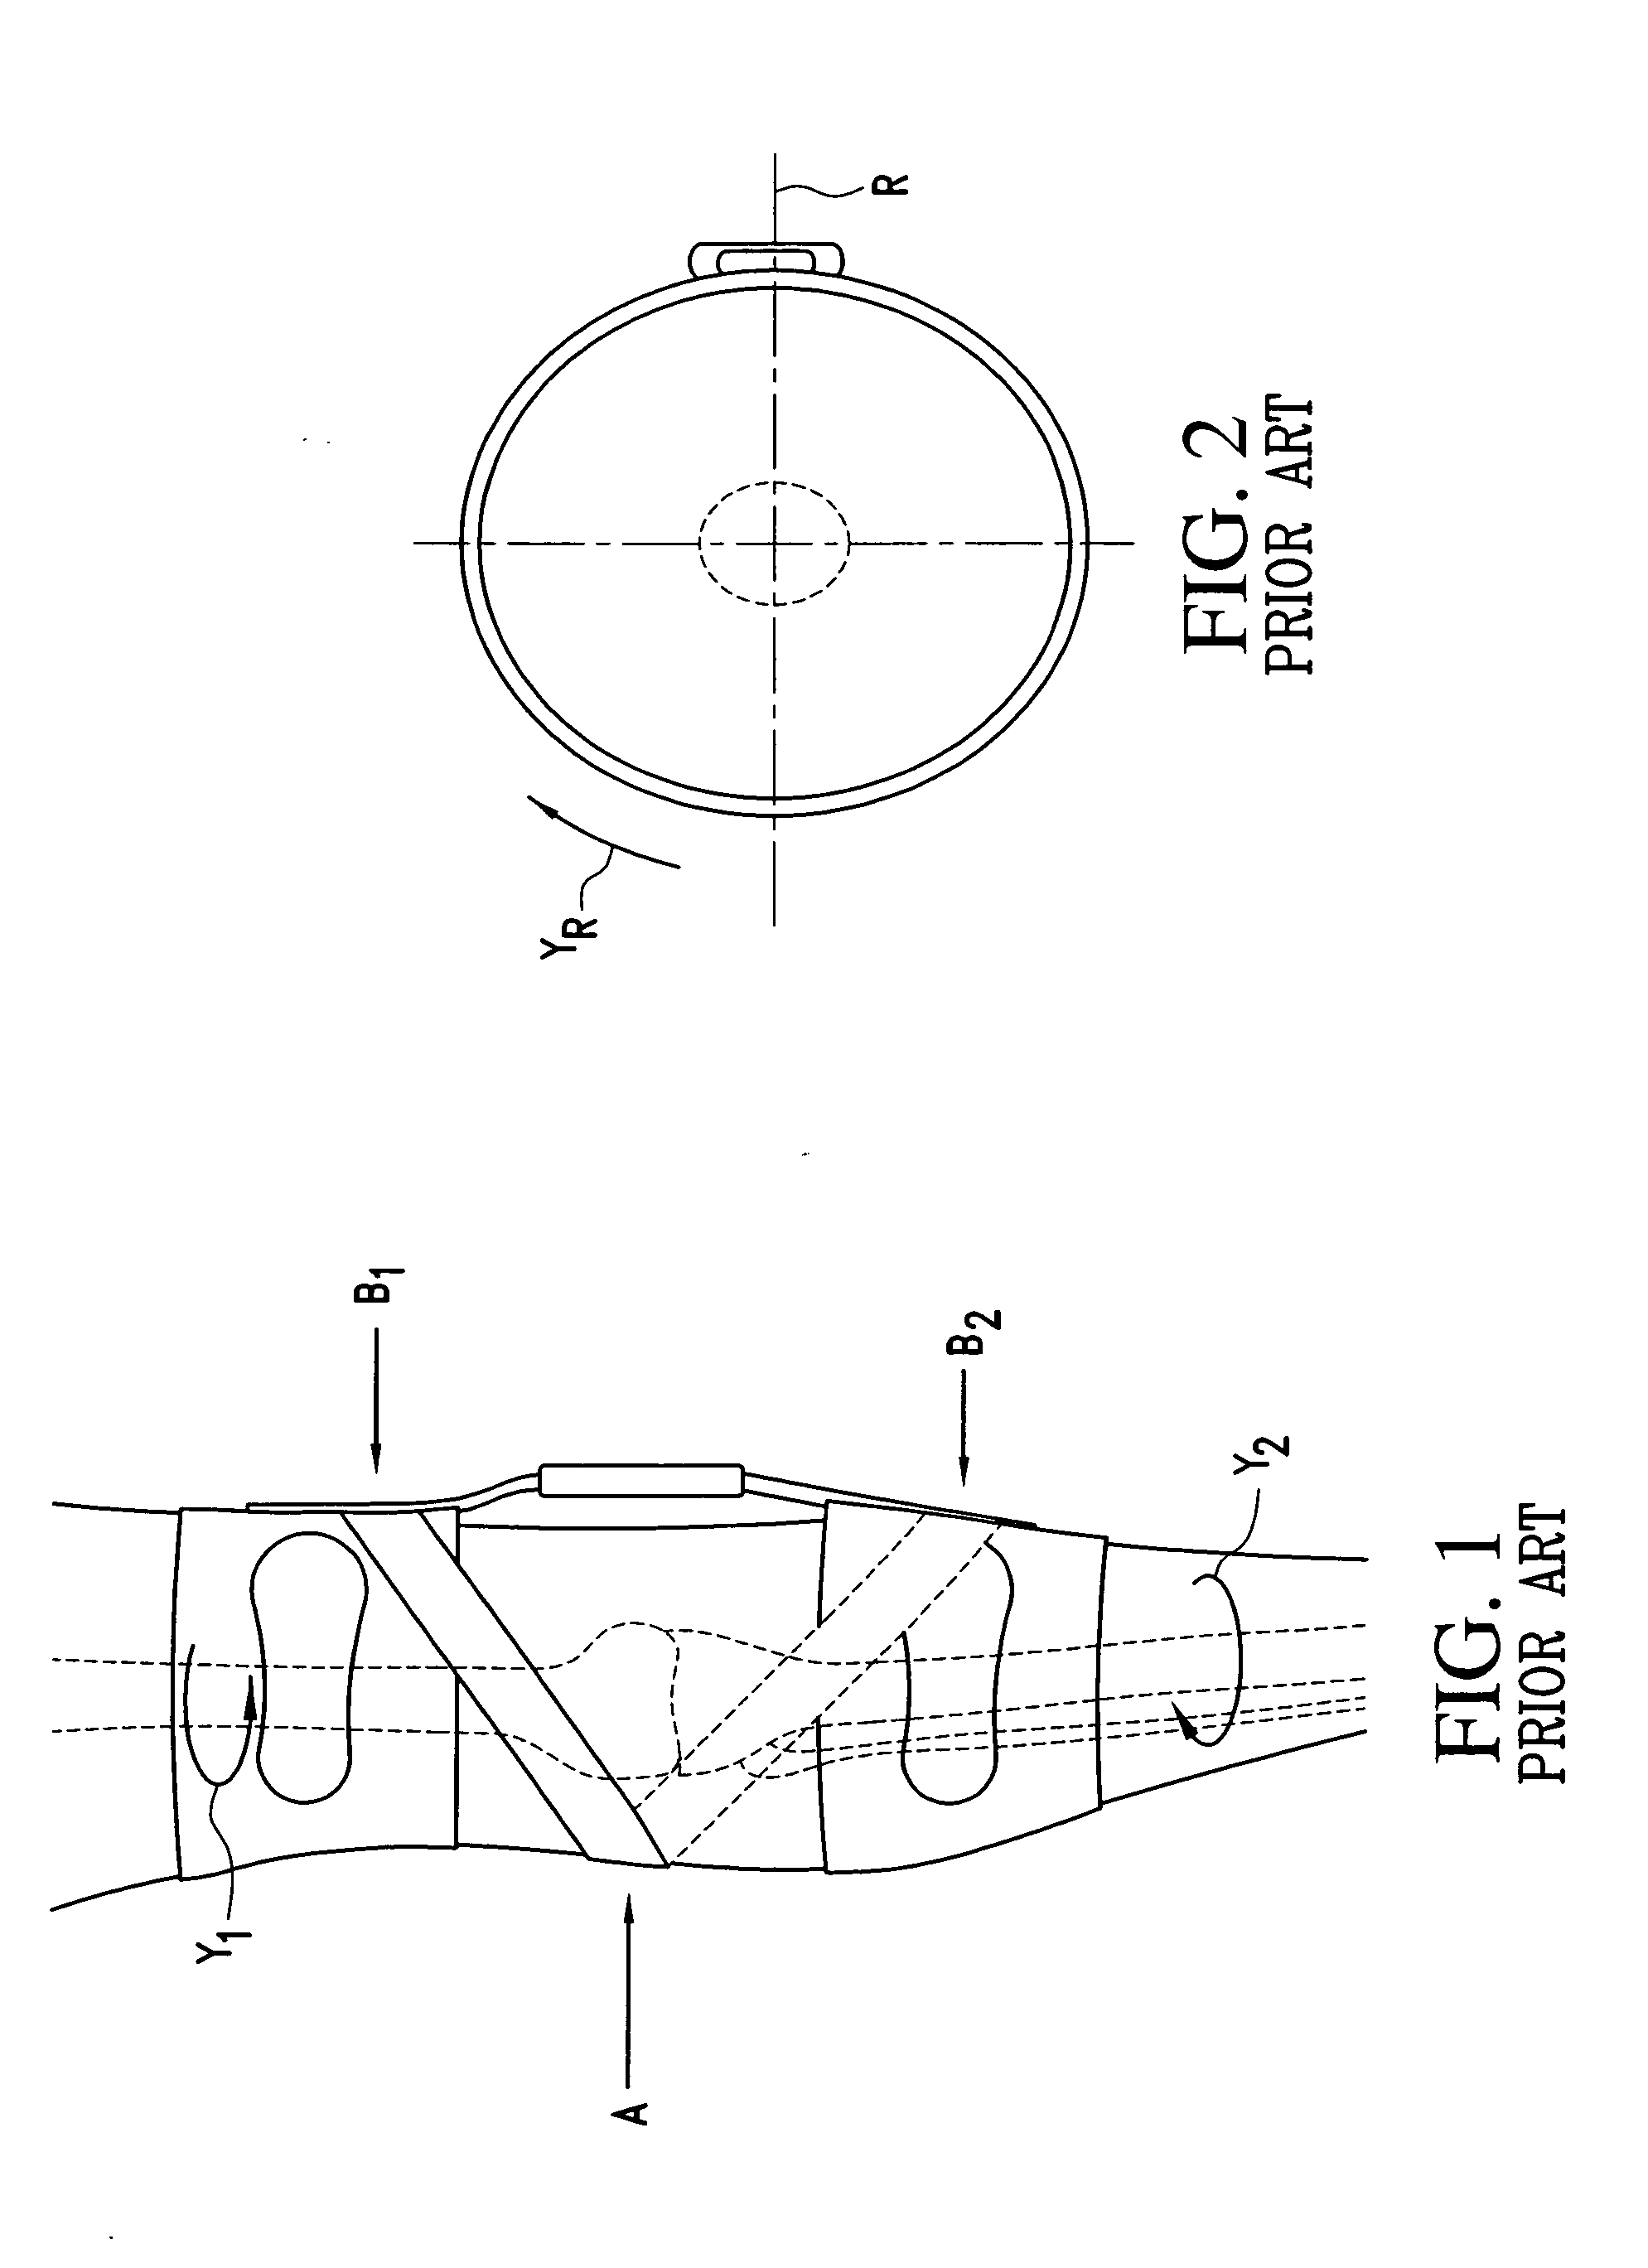 Orthotic device and method for securing the same